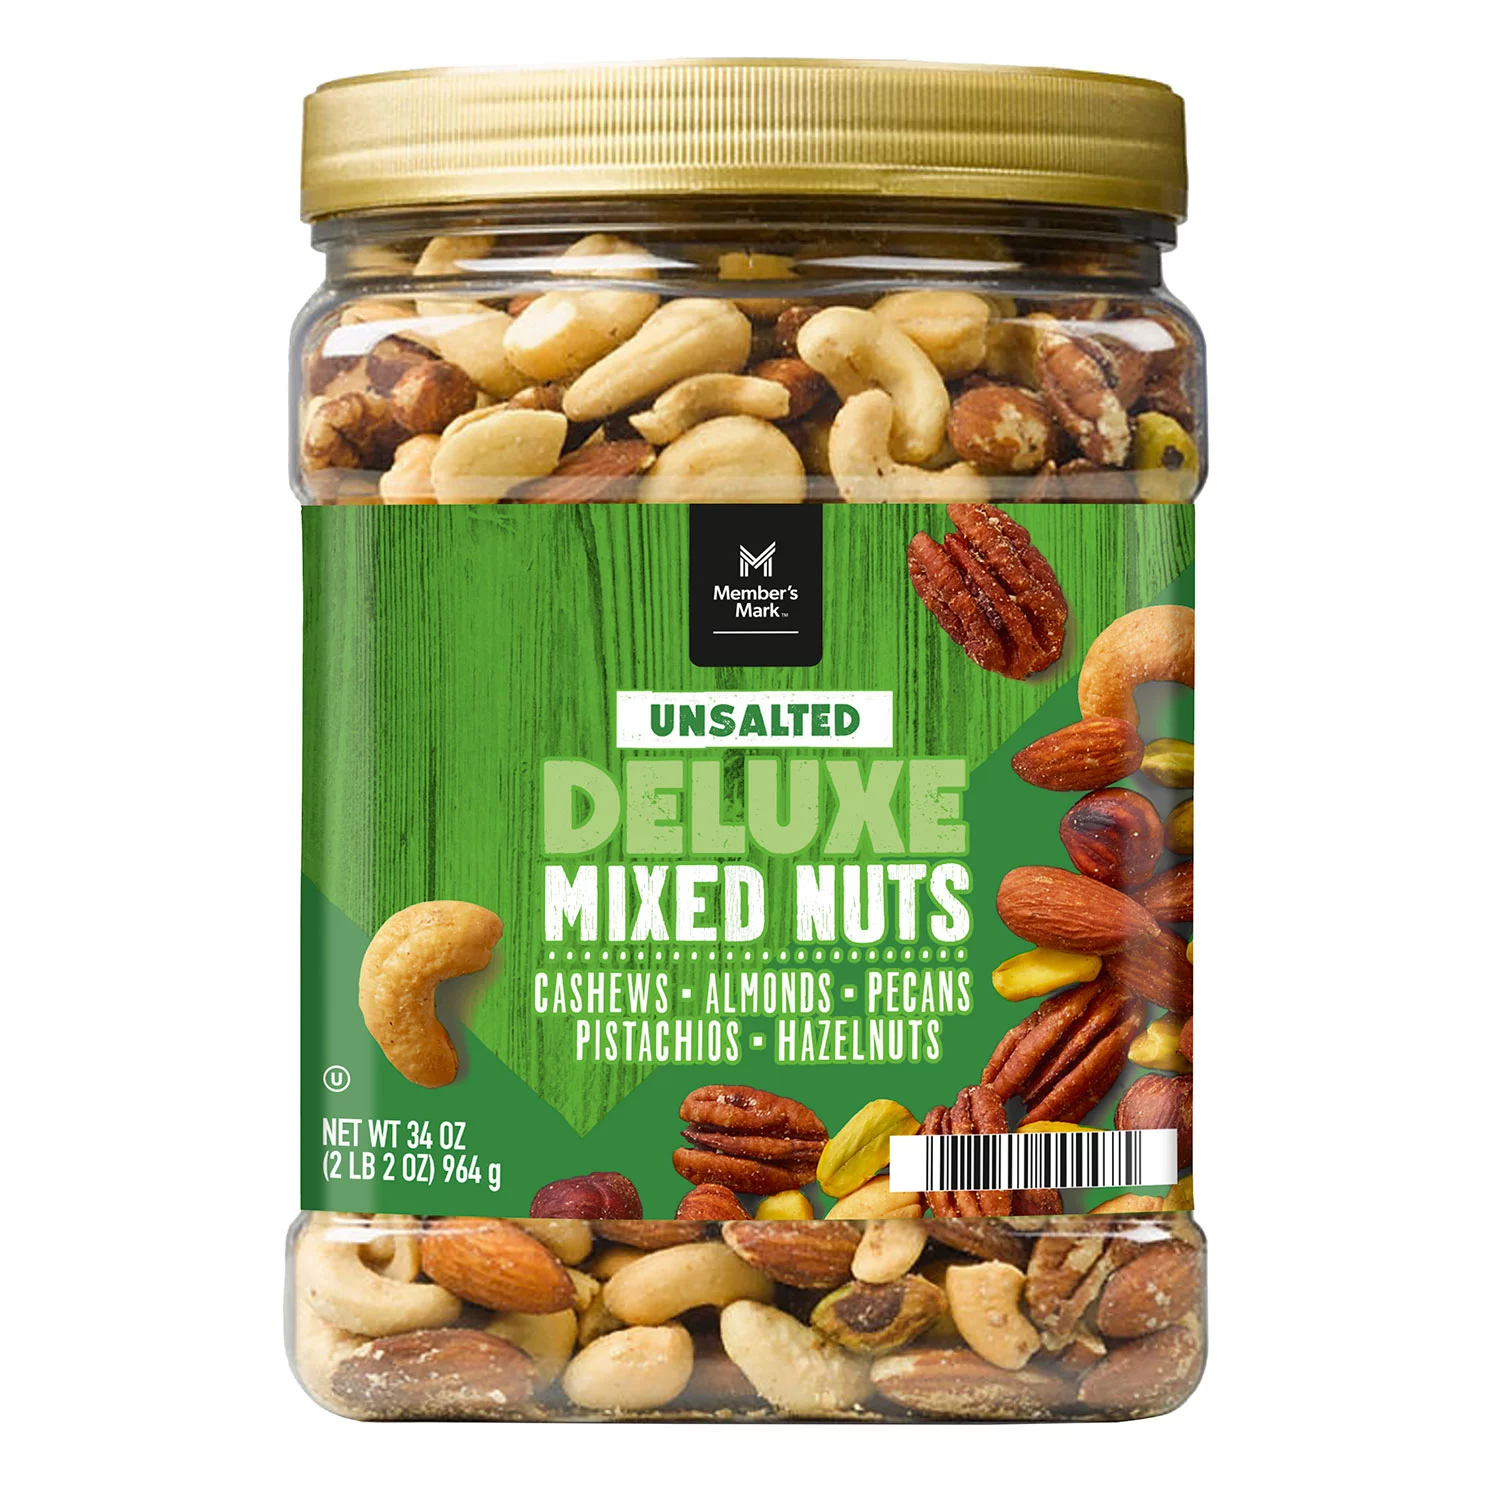 Member's Mark Unsalted Deluxe Mixed Nuts